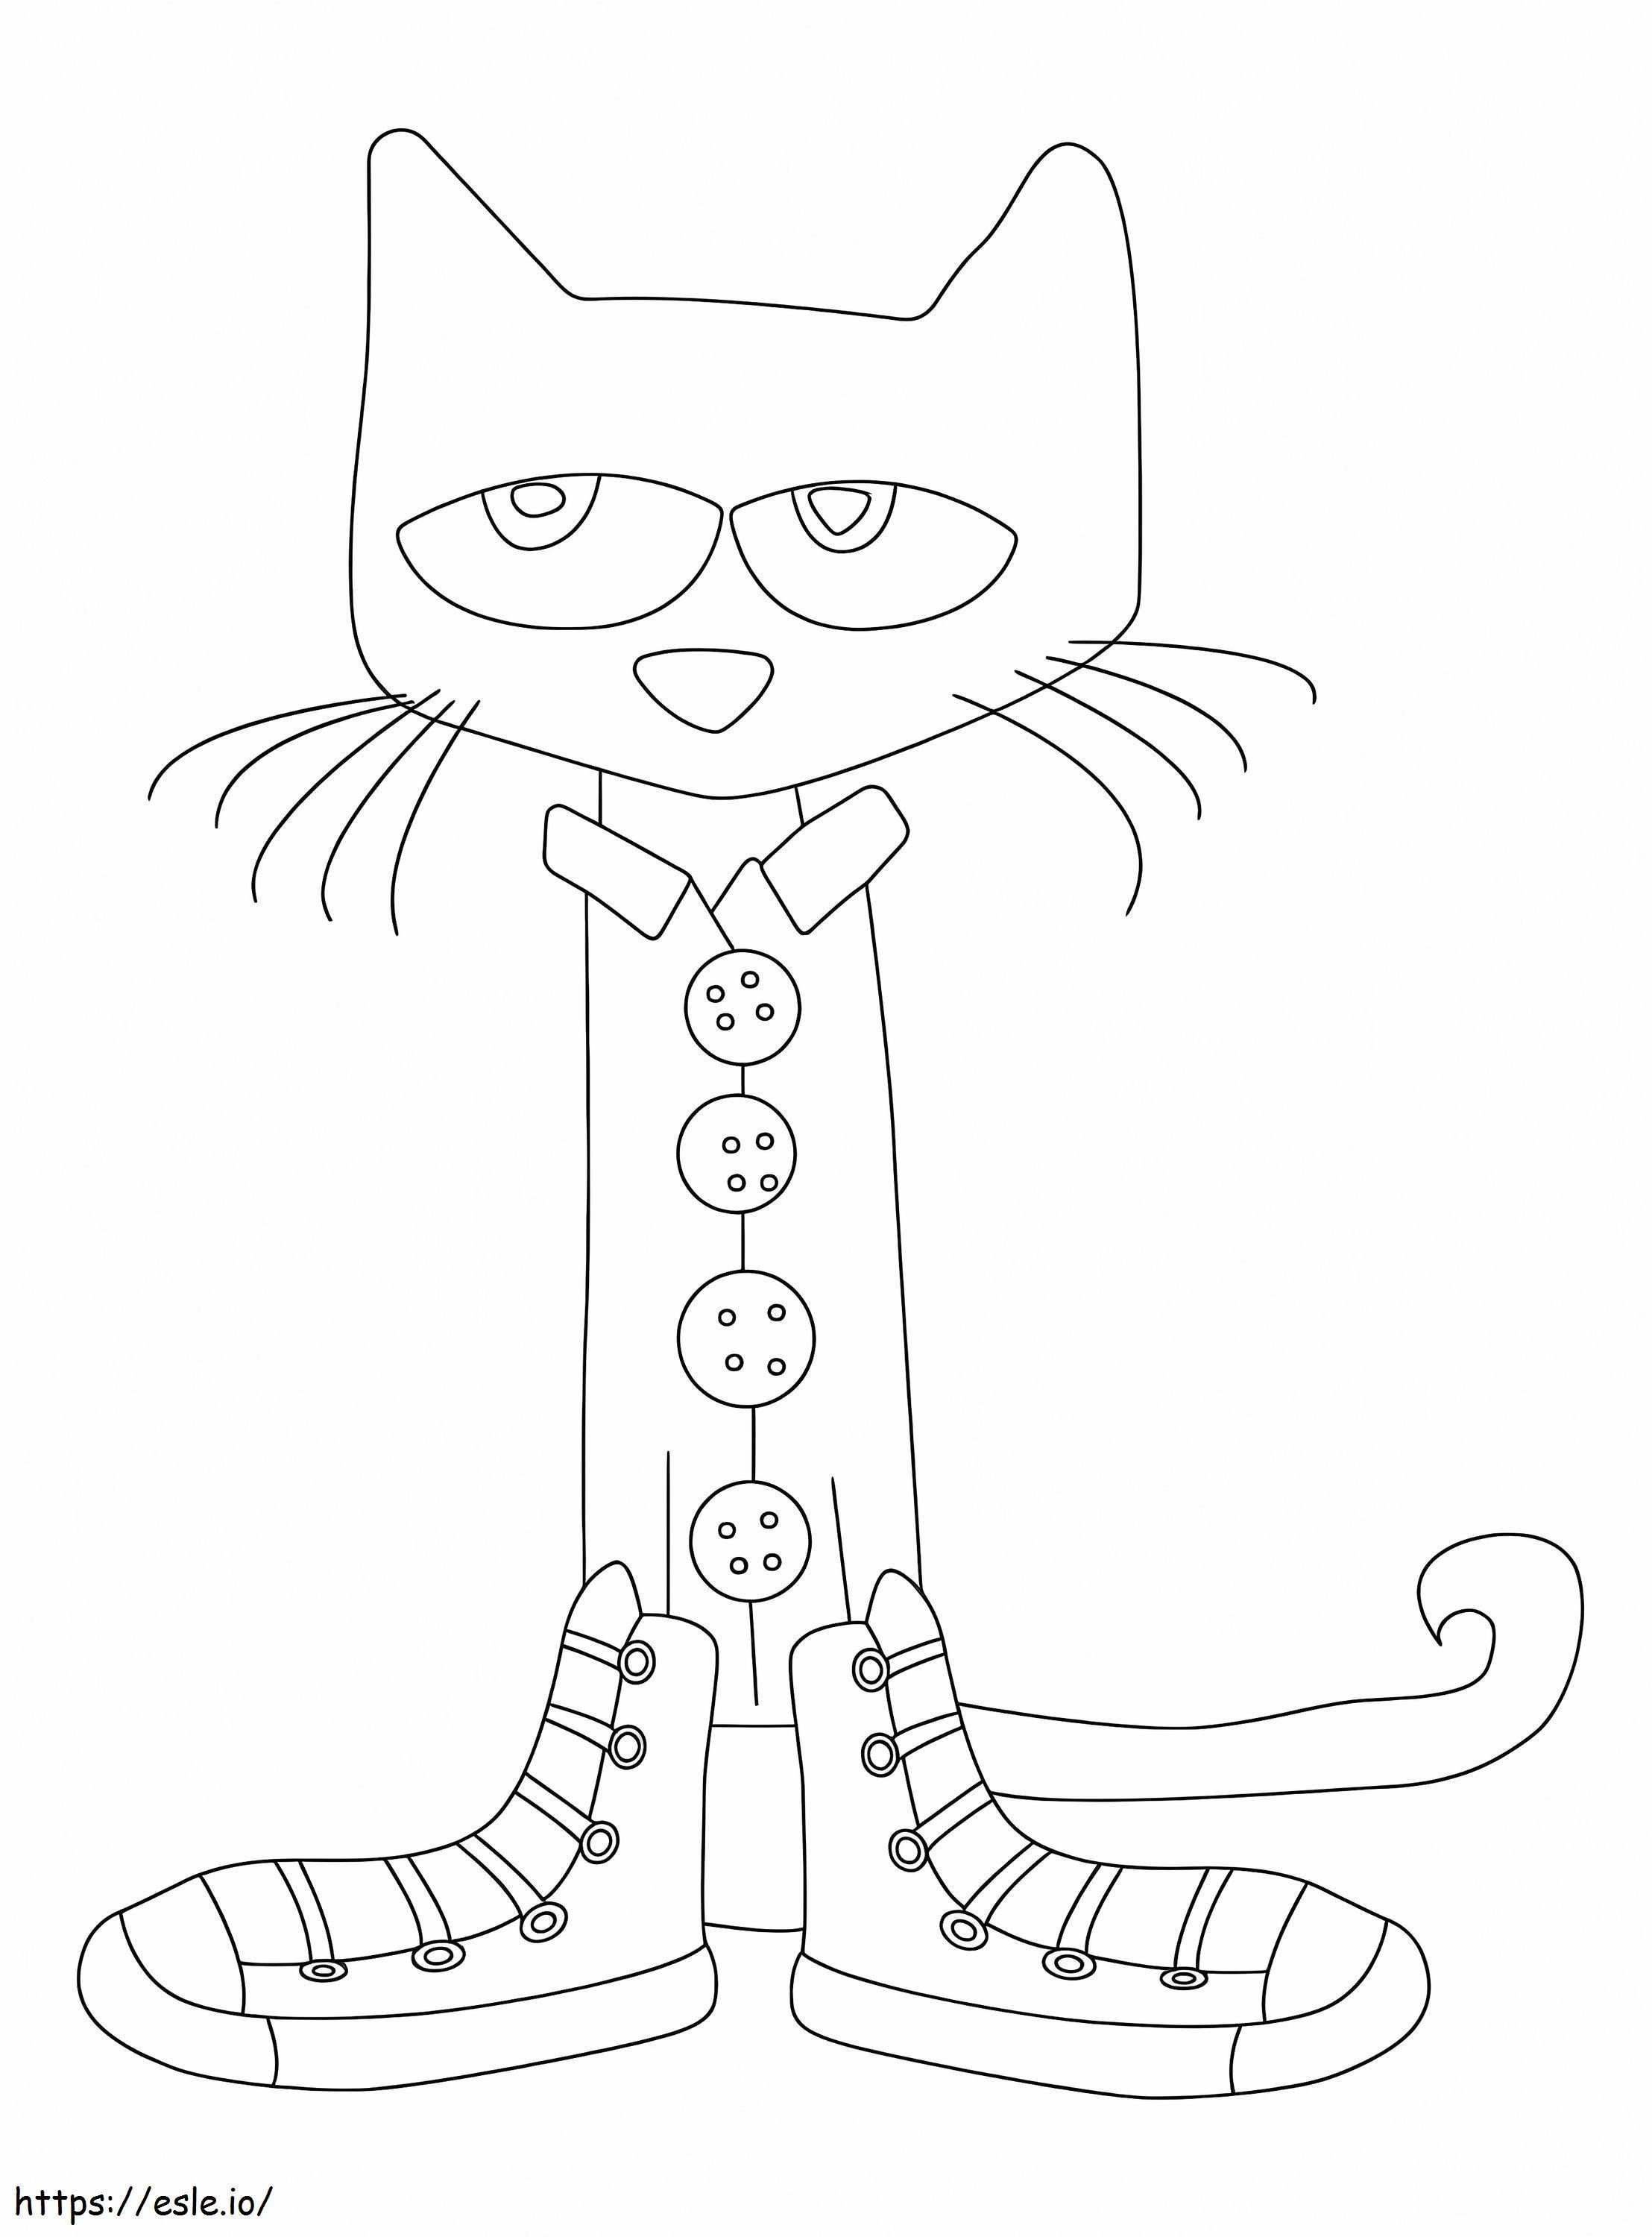 Pete The Cute Cat coloring page